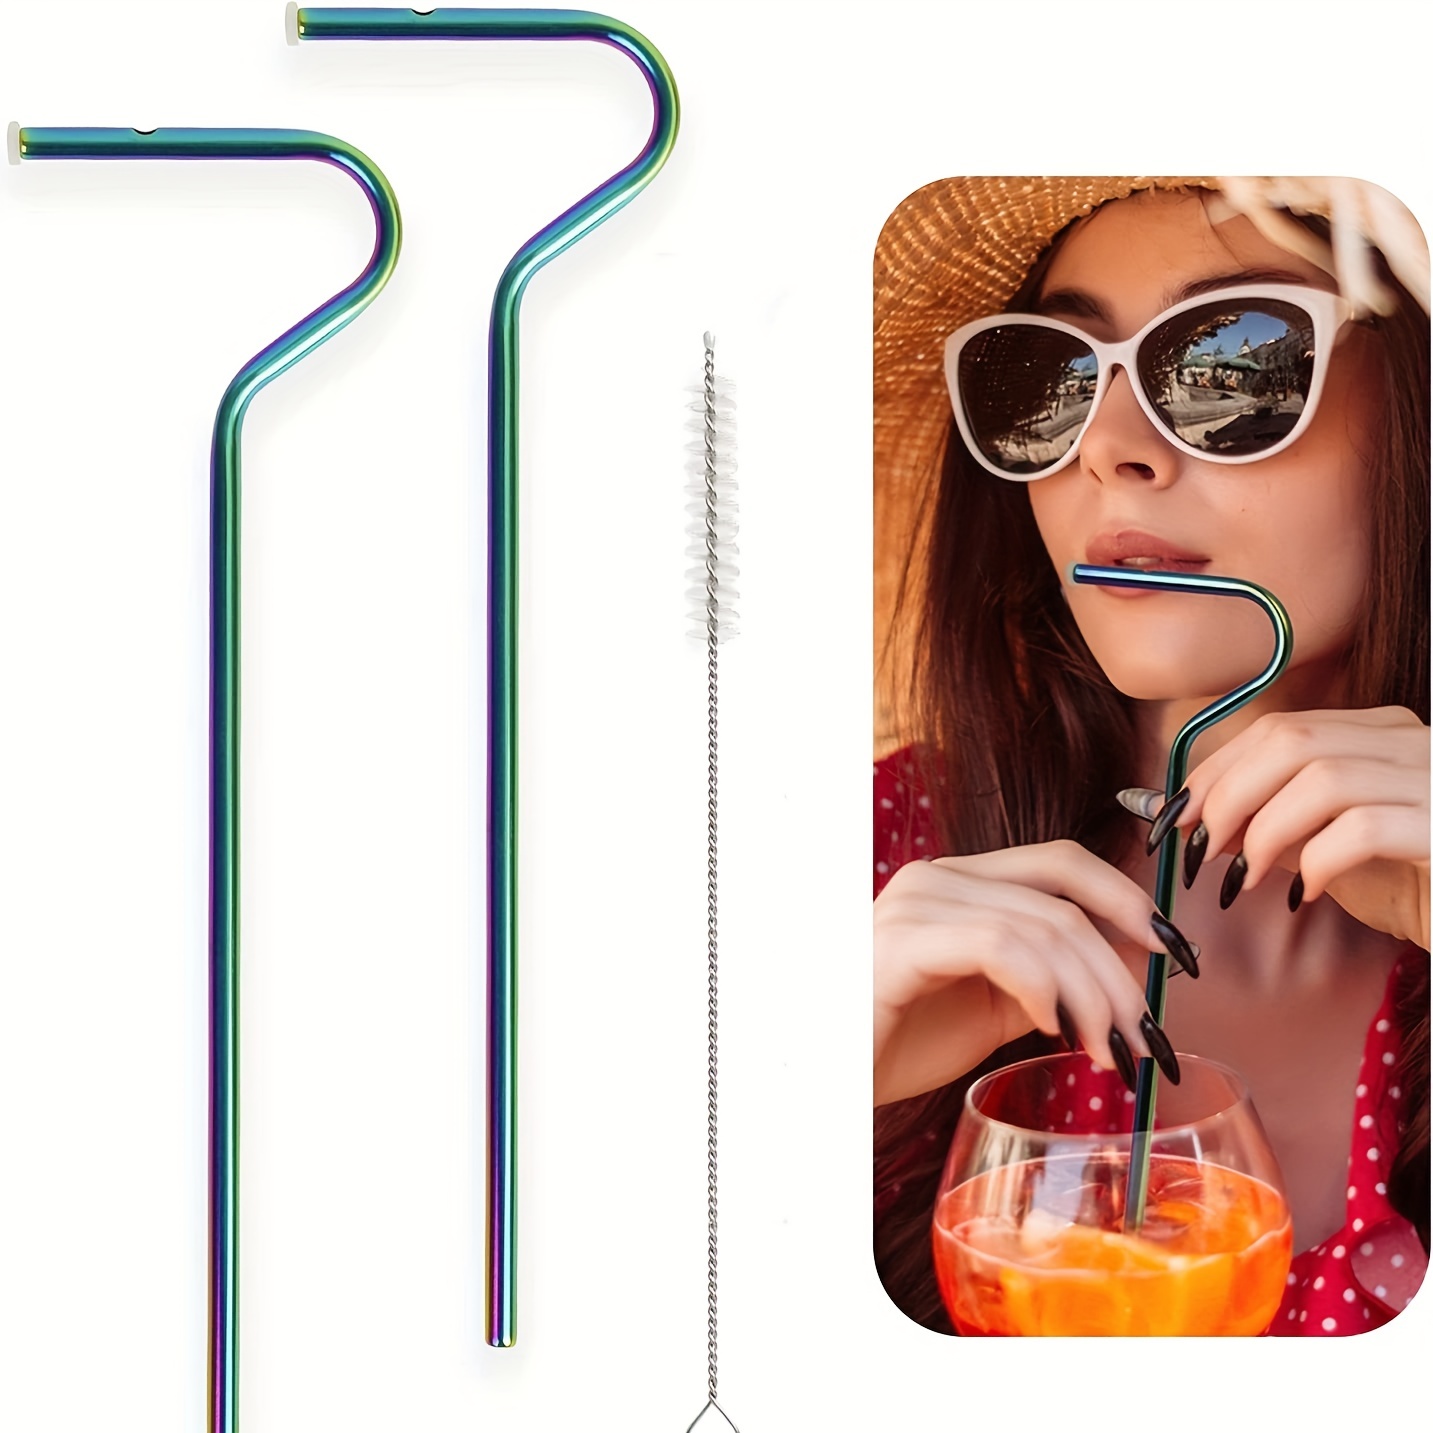 Flute Style Reusable Glass Straws Milkshake With Anti Wrinkle Design For  Engaging Lips And Lipstick Protection From Esw_home2, $6.01